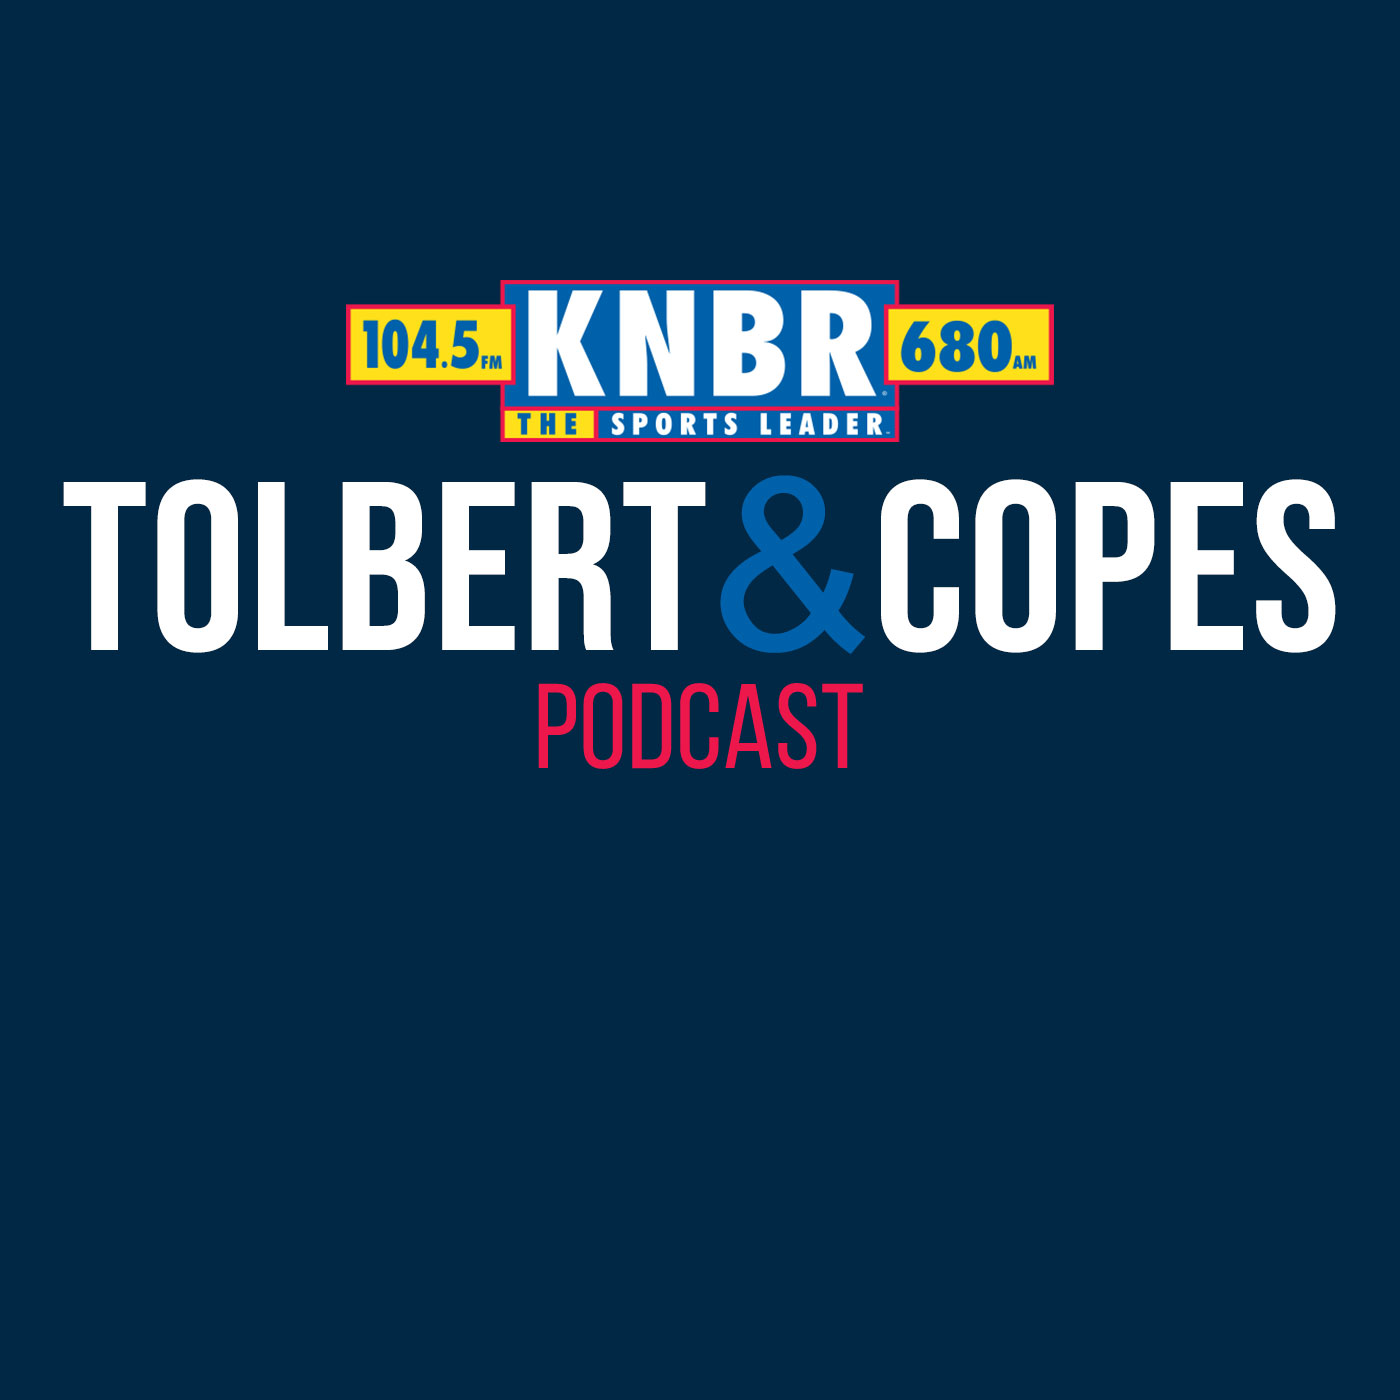 4-19 J.T. Snow joins Tolbert & Copes to discuss catching, missing signs, & more